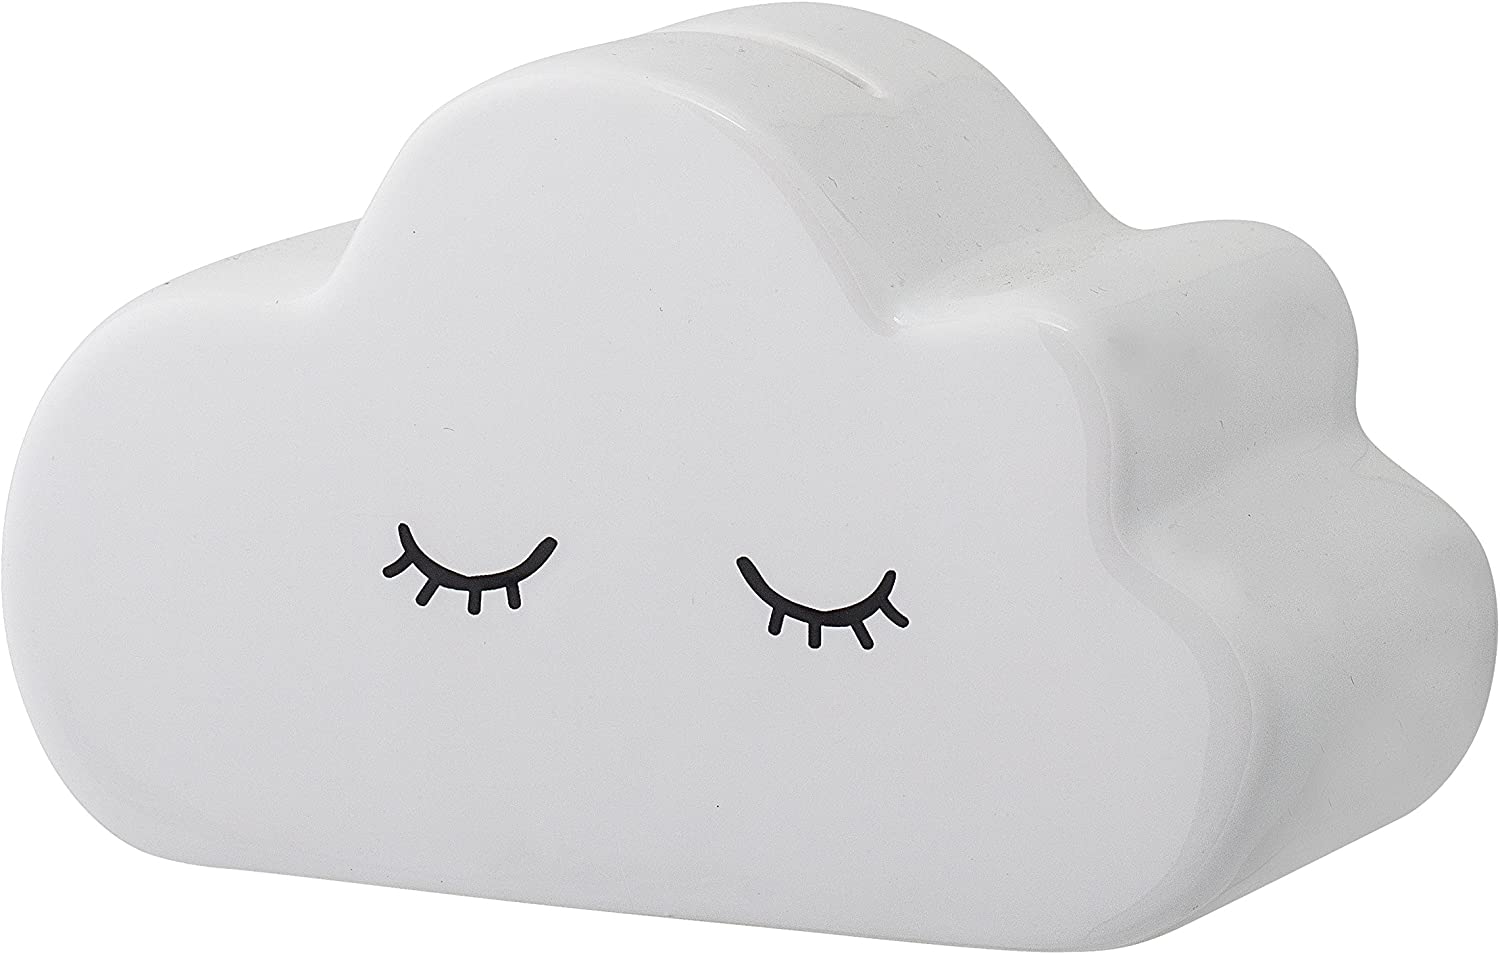 Bloomingville Bloomingville Cloud Ceramic Smilla Coin Bank - Little Miss Muffin Children & Home